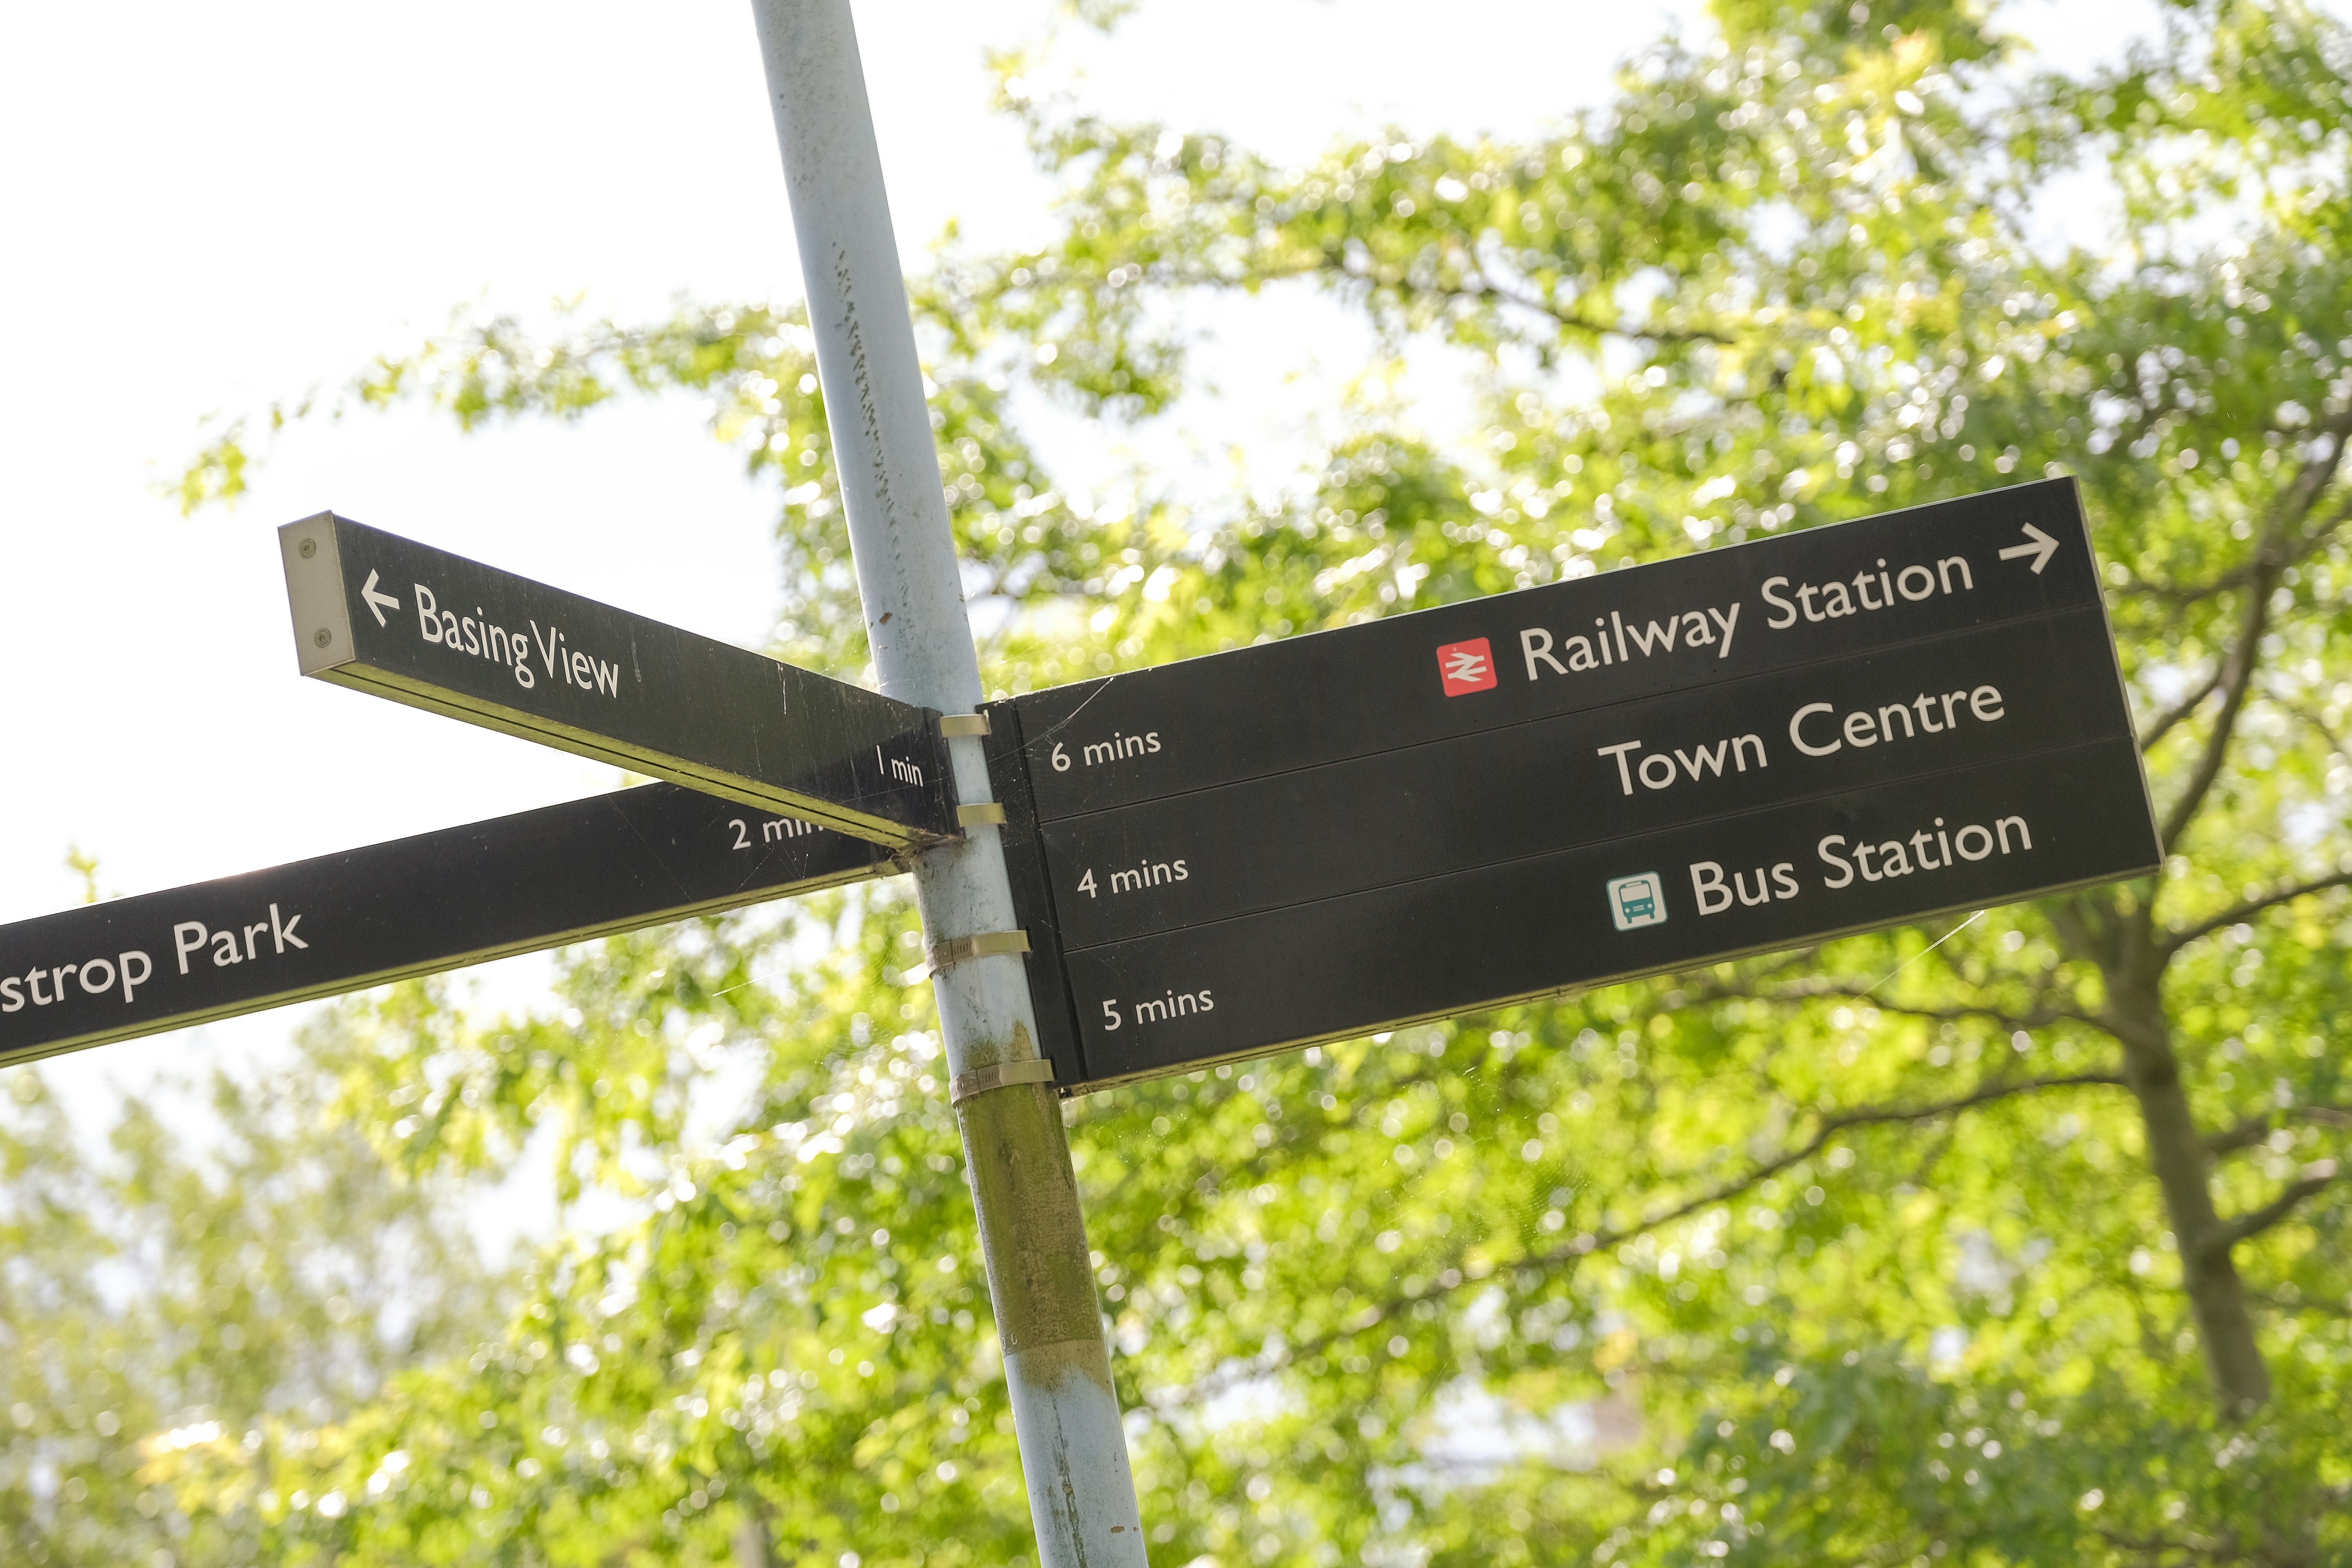 A sign post showing the way to the Railway Station, Town Centre, Bus Station, Basing View and Eastrop Park.